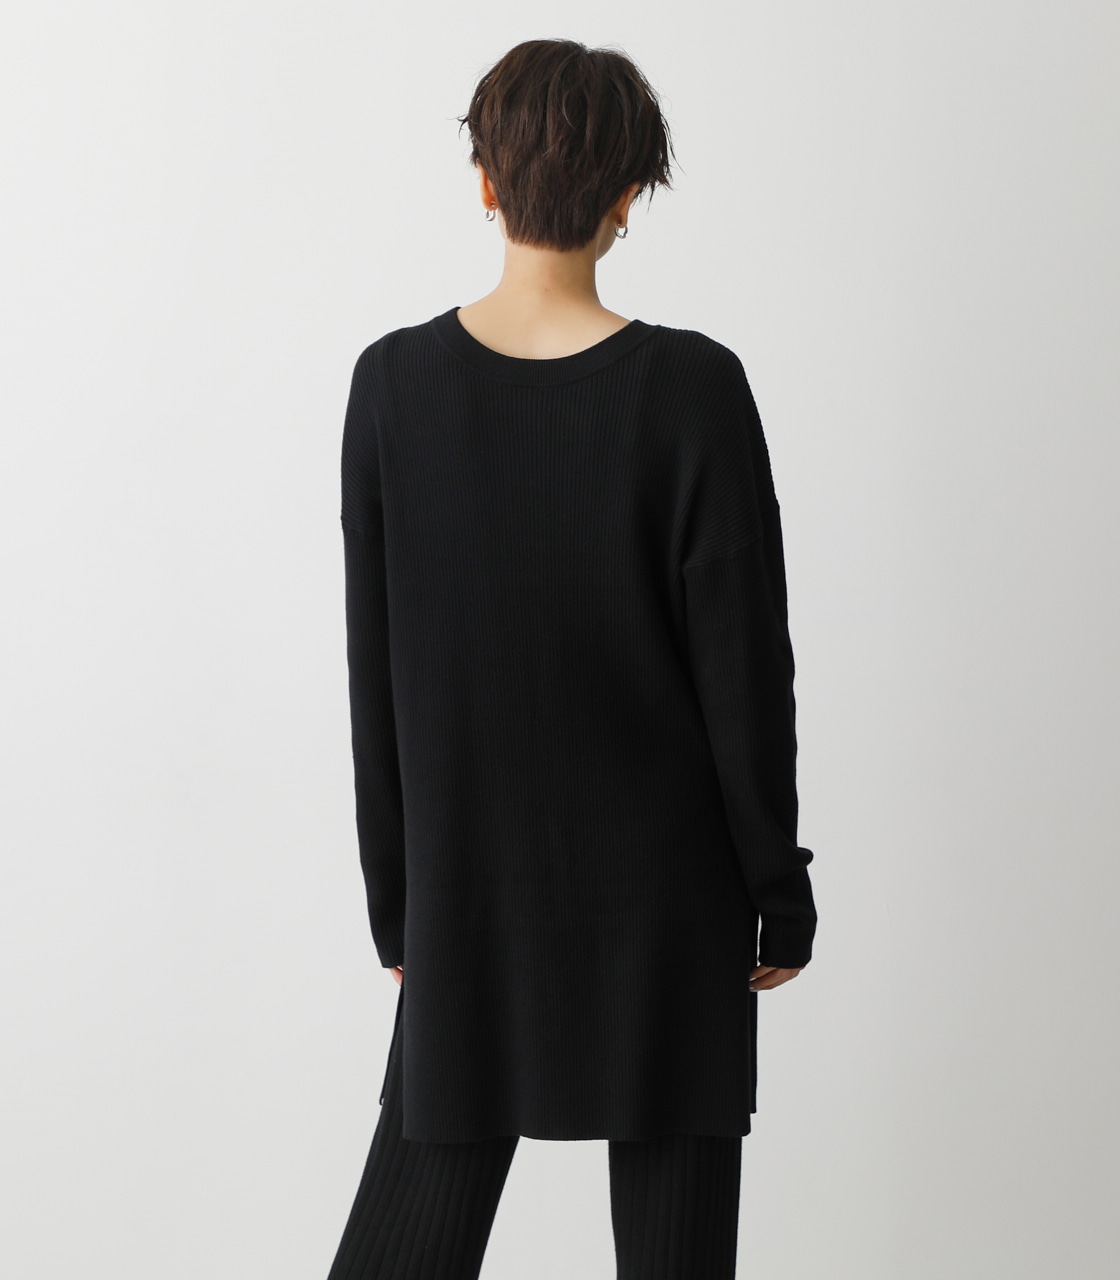 2WAY RIB KNIT LONG TOPS/2WAYリブニットロングトップス 詳細画像 BLK 12